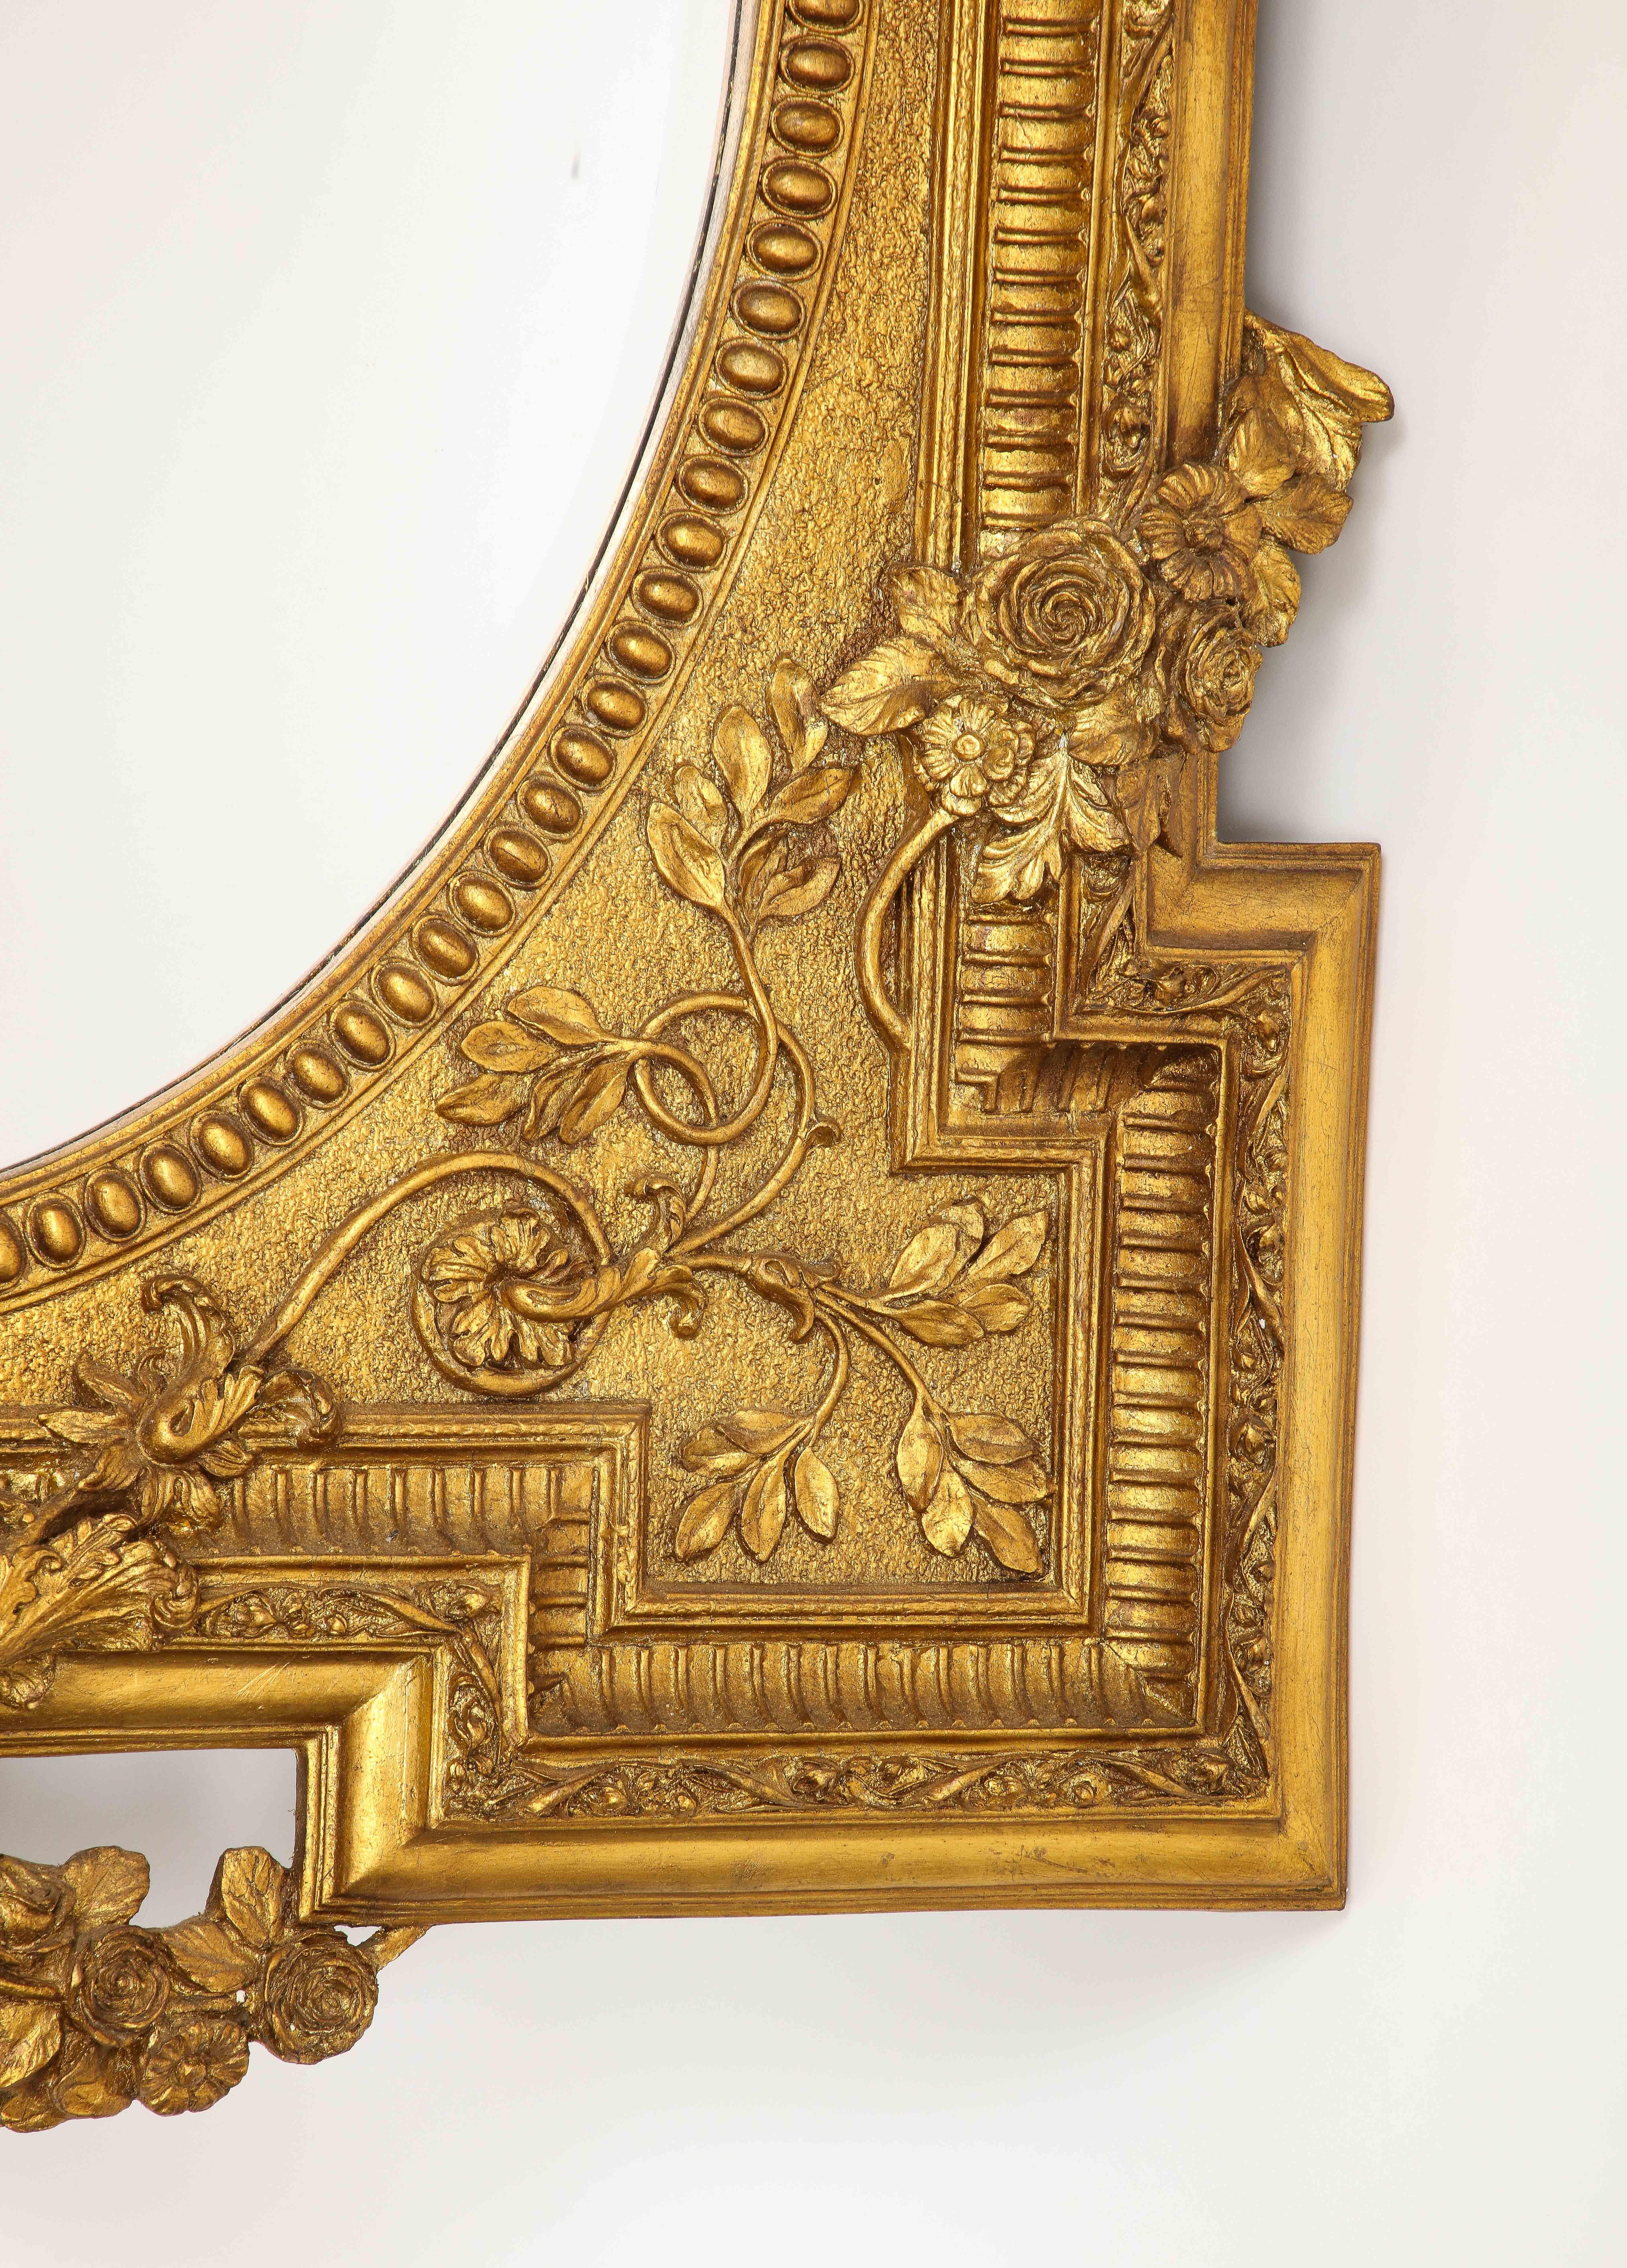 Marvelous French Giltwood Hand-Carved Beveled Mirror with Floral Vine Designs For Sale 3